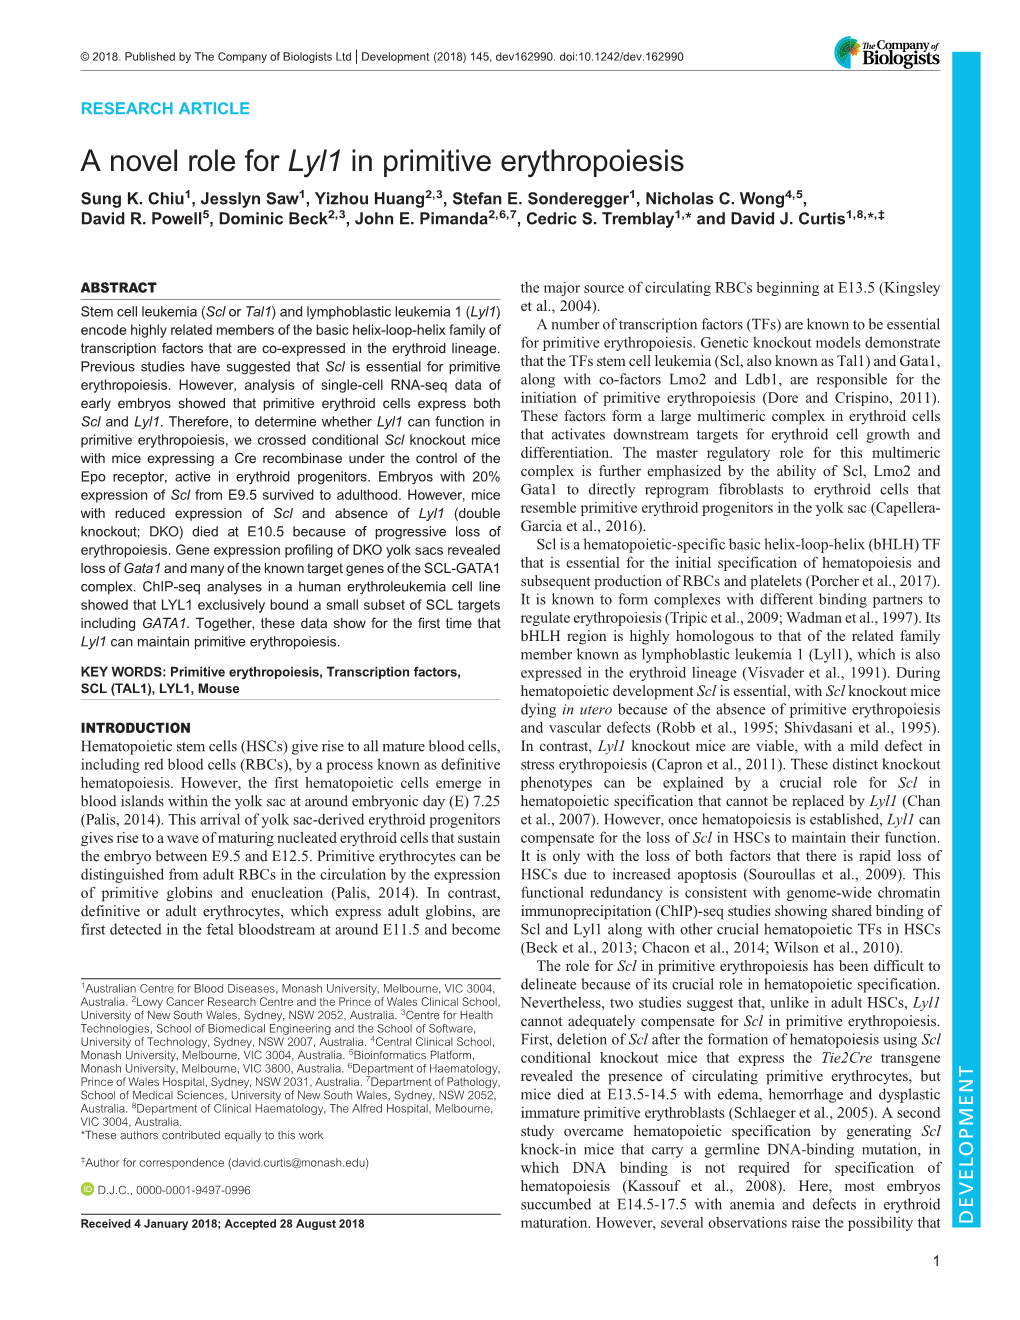 A Novel Role for Lyl1 in Primitive Erythropoiesis Sung K